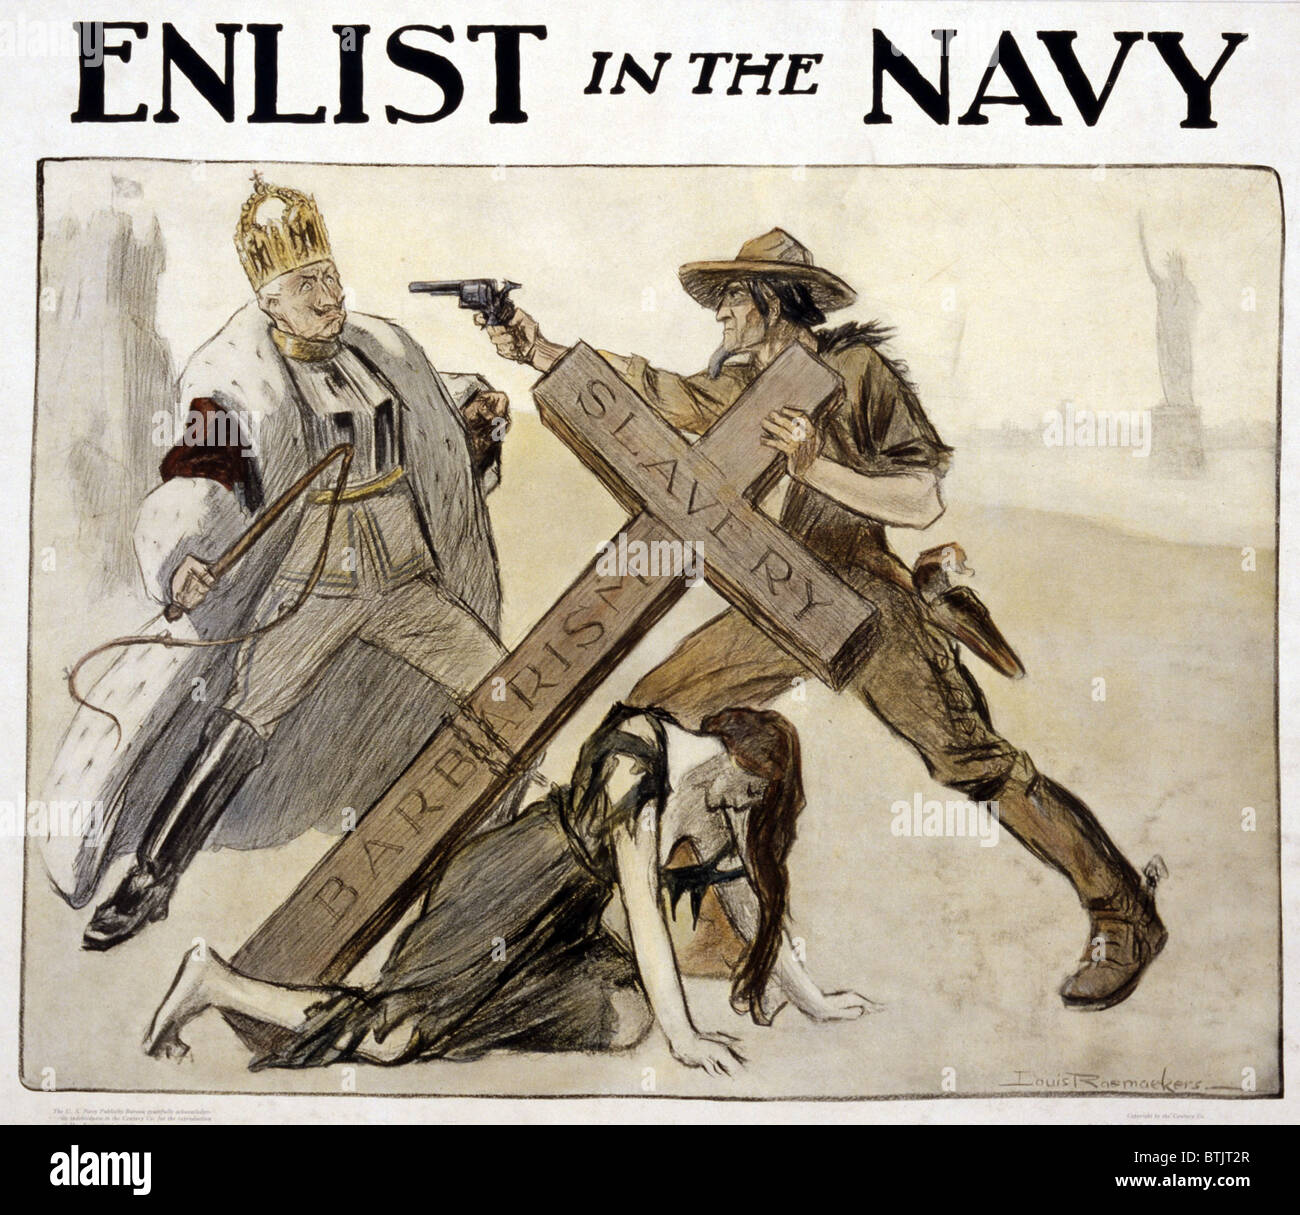 World War I American recruitment poster for US Navy shows Uncle Sam, protecting a woman and points a revolver at the crowned Kaiser. Statue of Liberty visible in background. Stock Photo